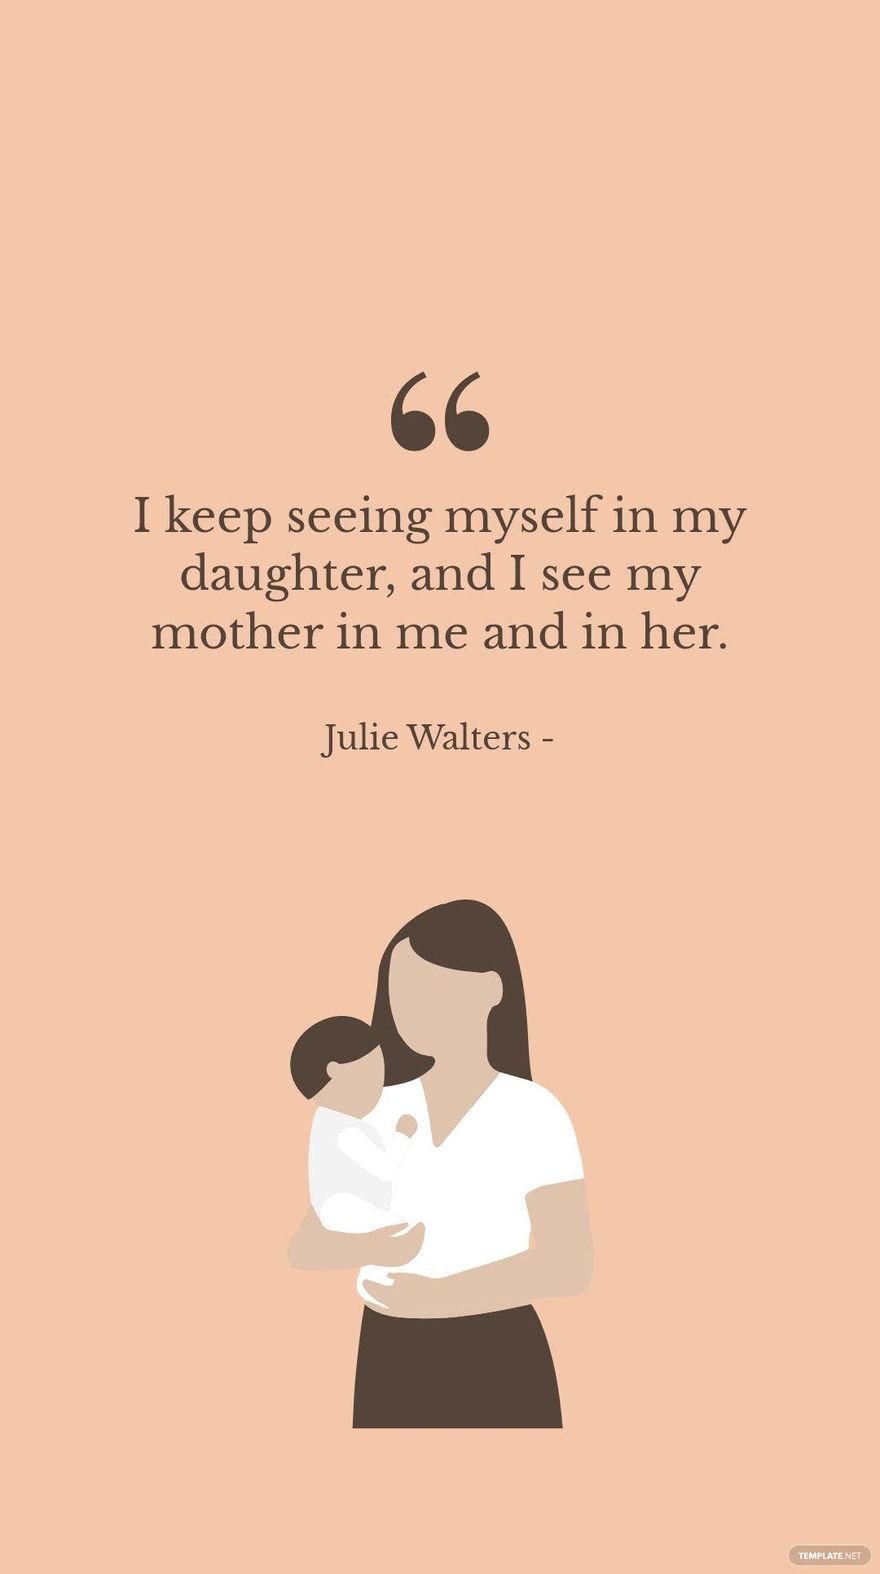 Free Julie Walters - I keep seeing myself in my daughter, and I see my mother in me and in her.